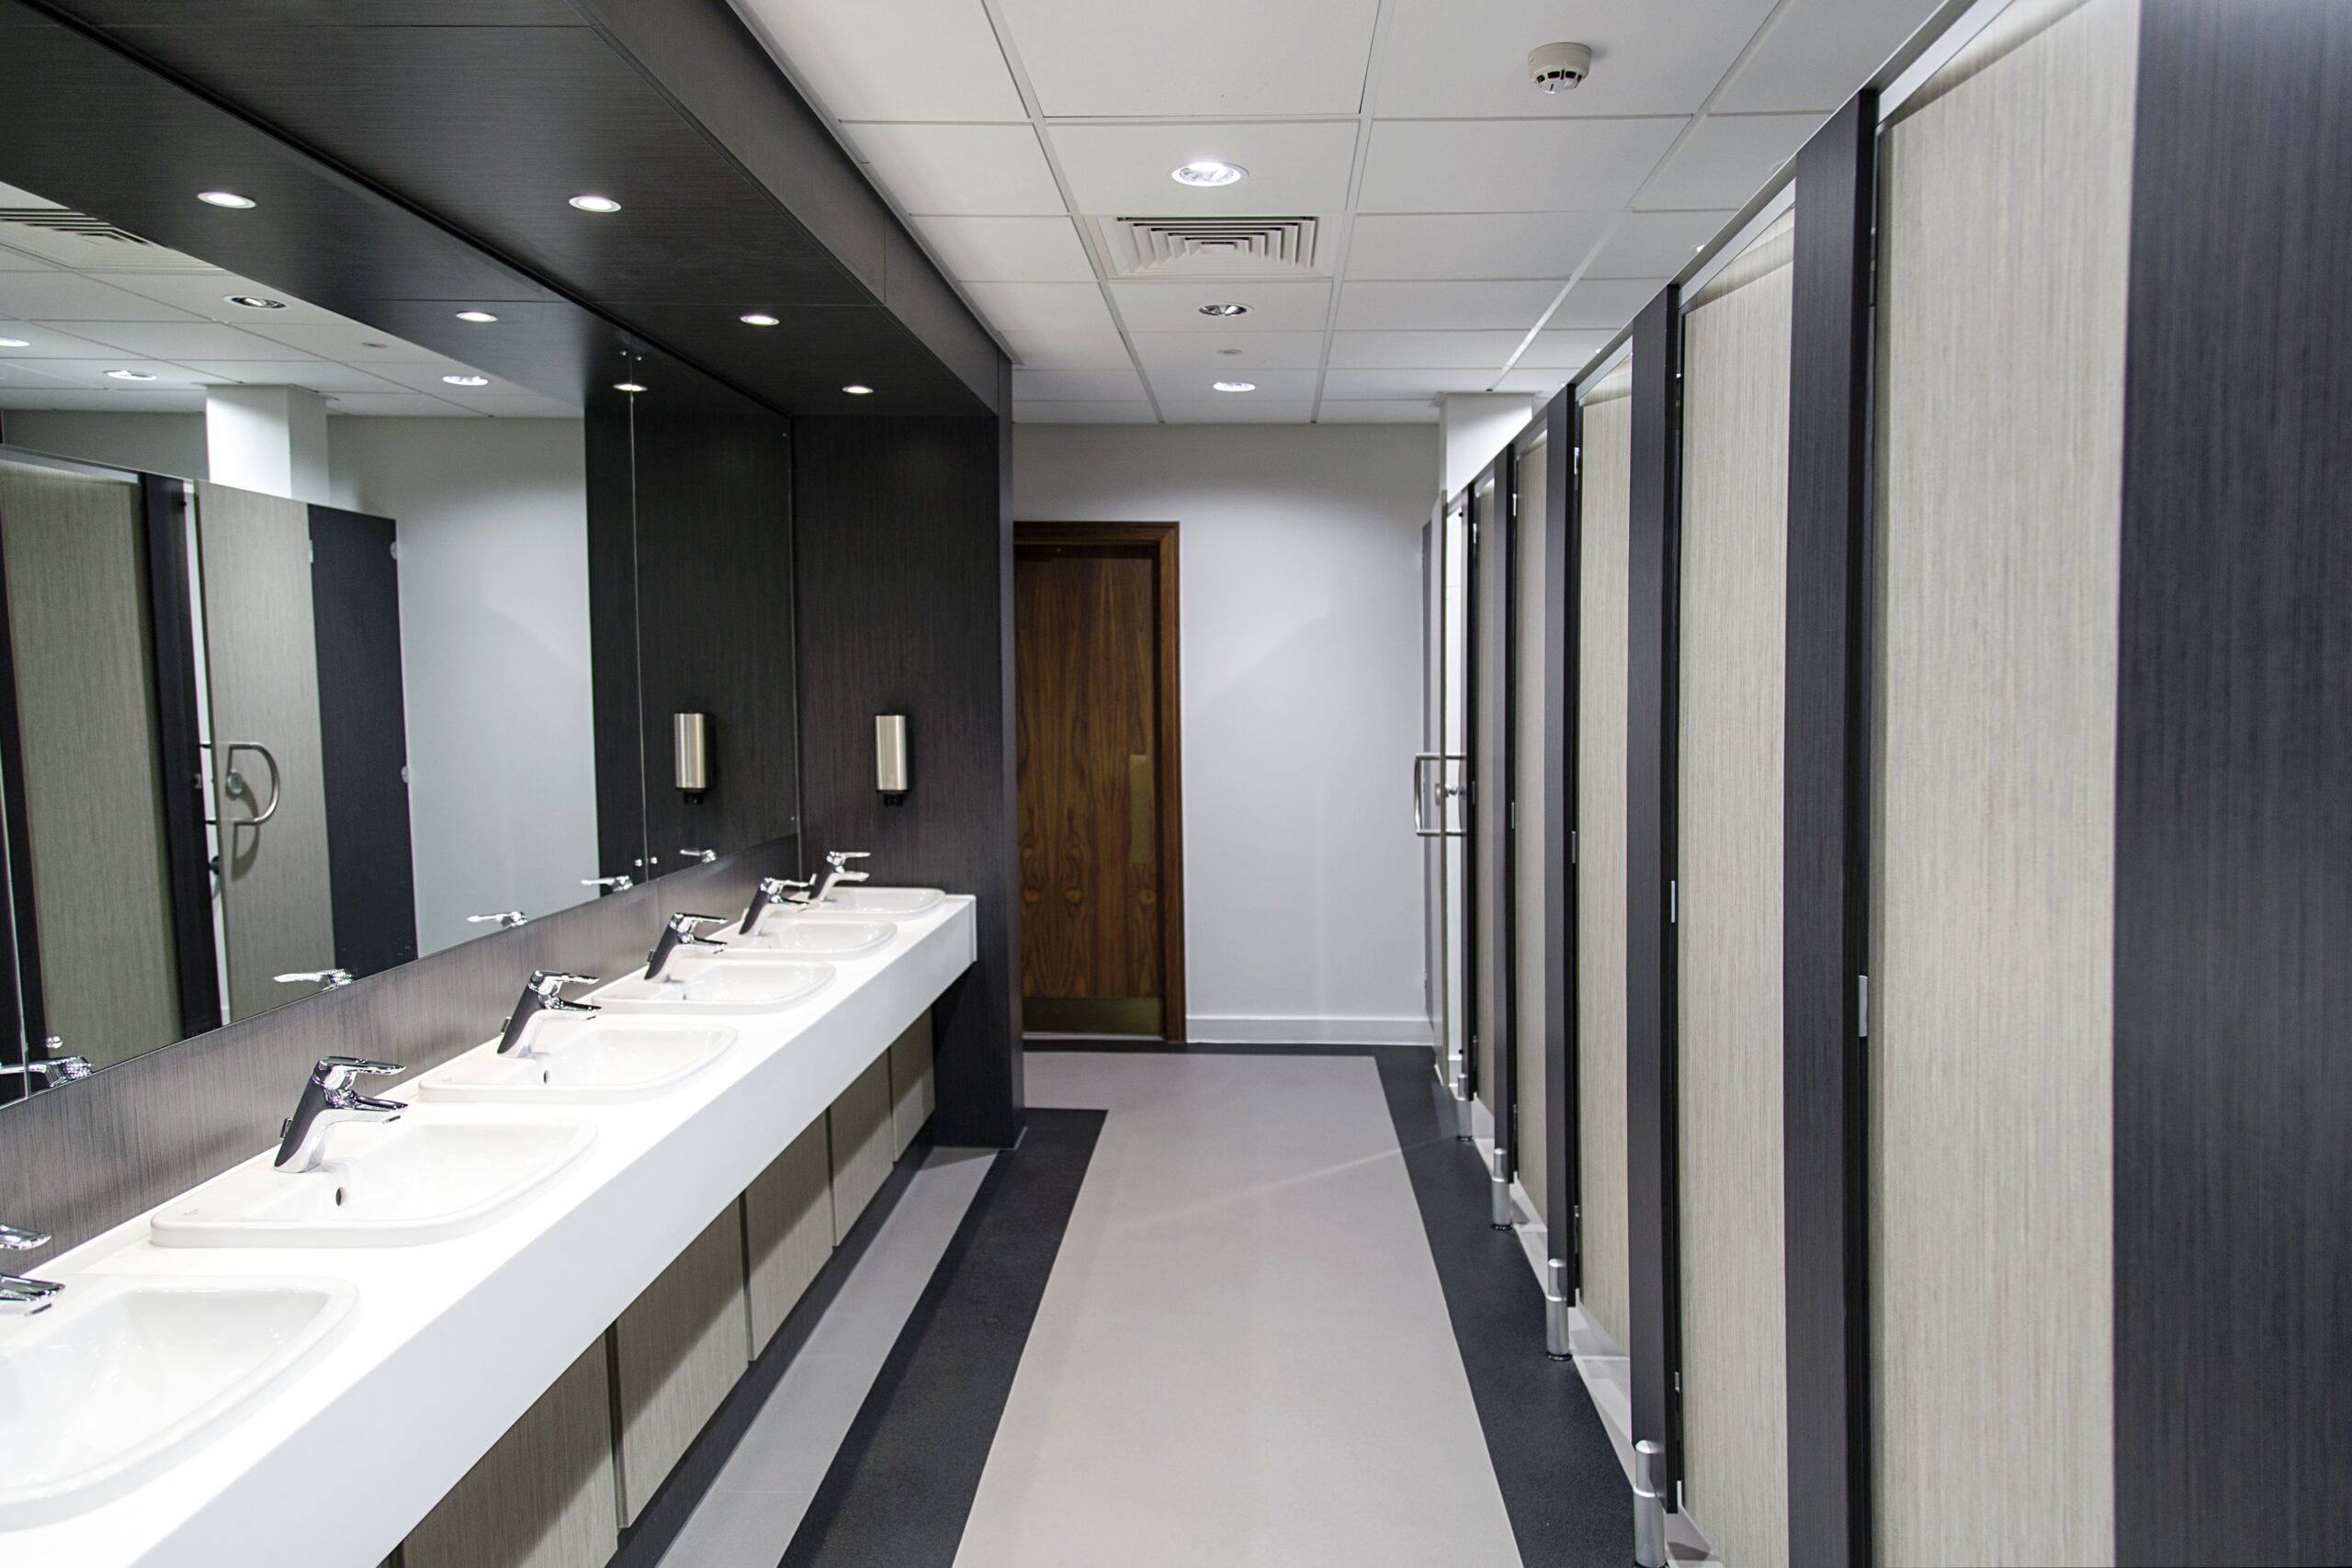 hygiene bathrooms, clean stall doors on right, taps on left, and a clear walkway